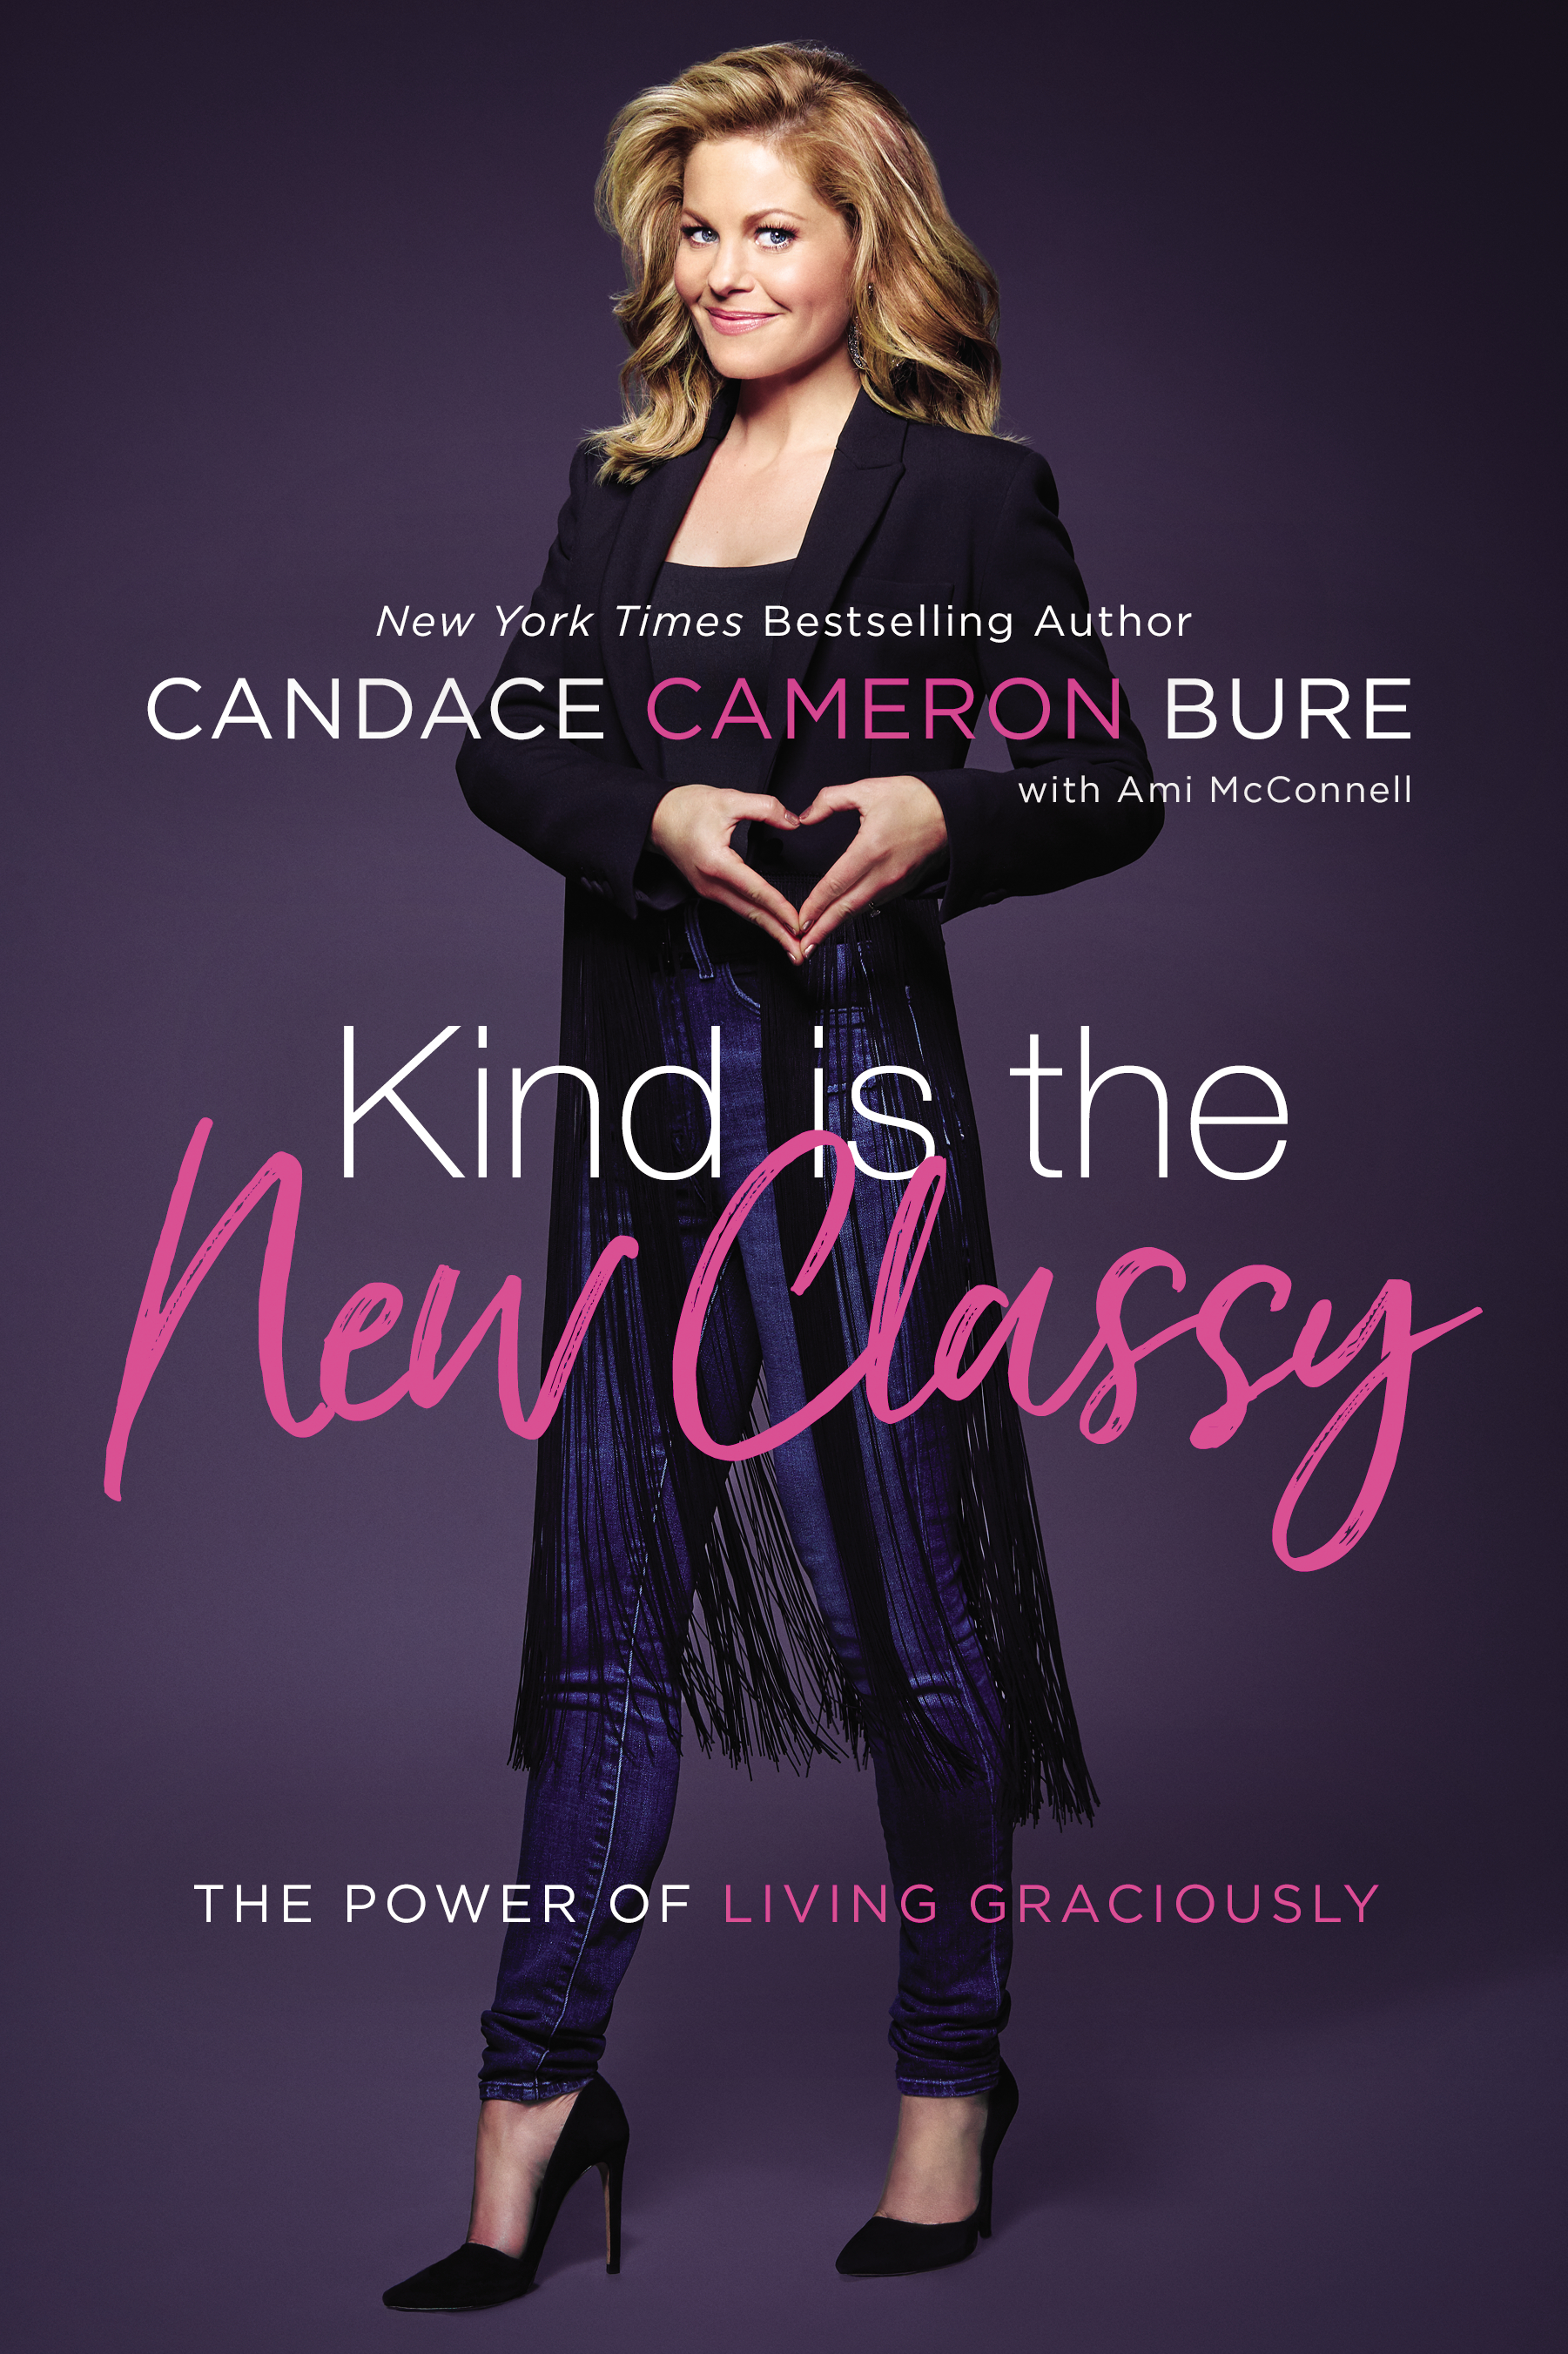 Candace Cameron Bure - Kinds is the New Classy book cover